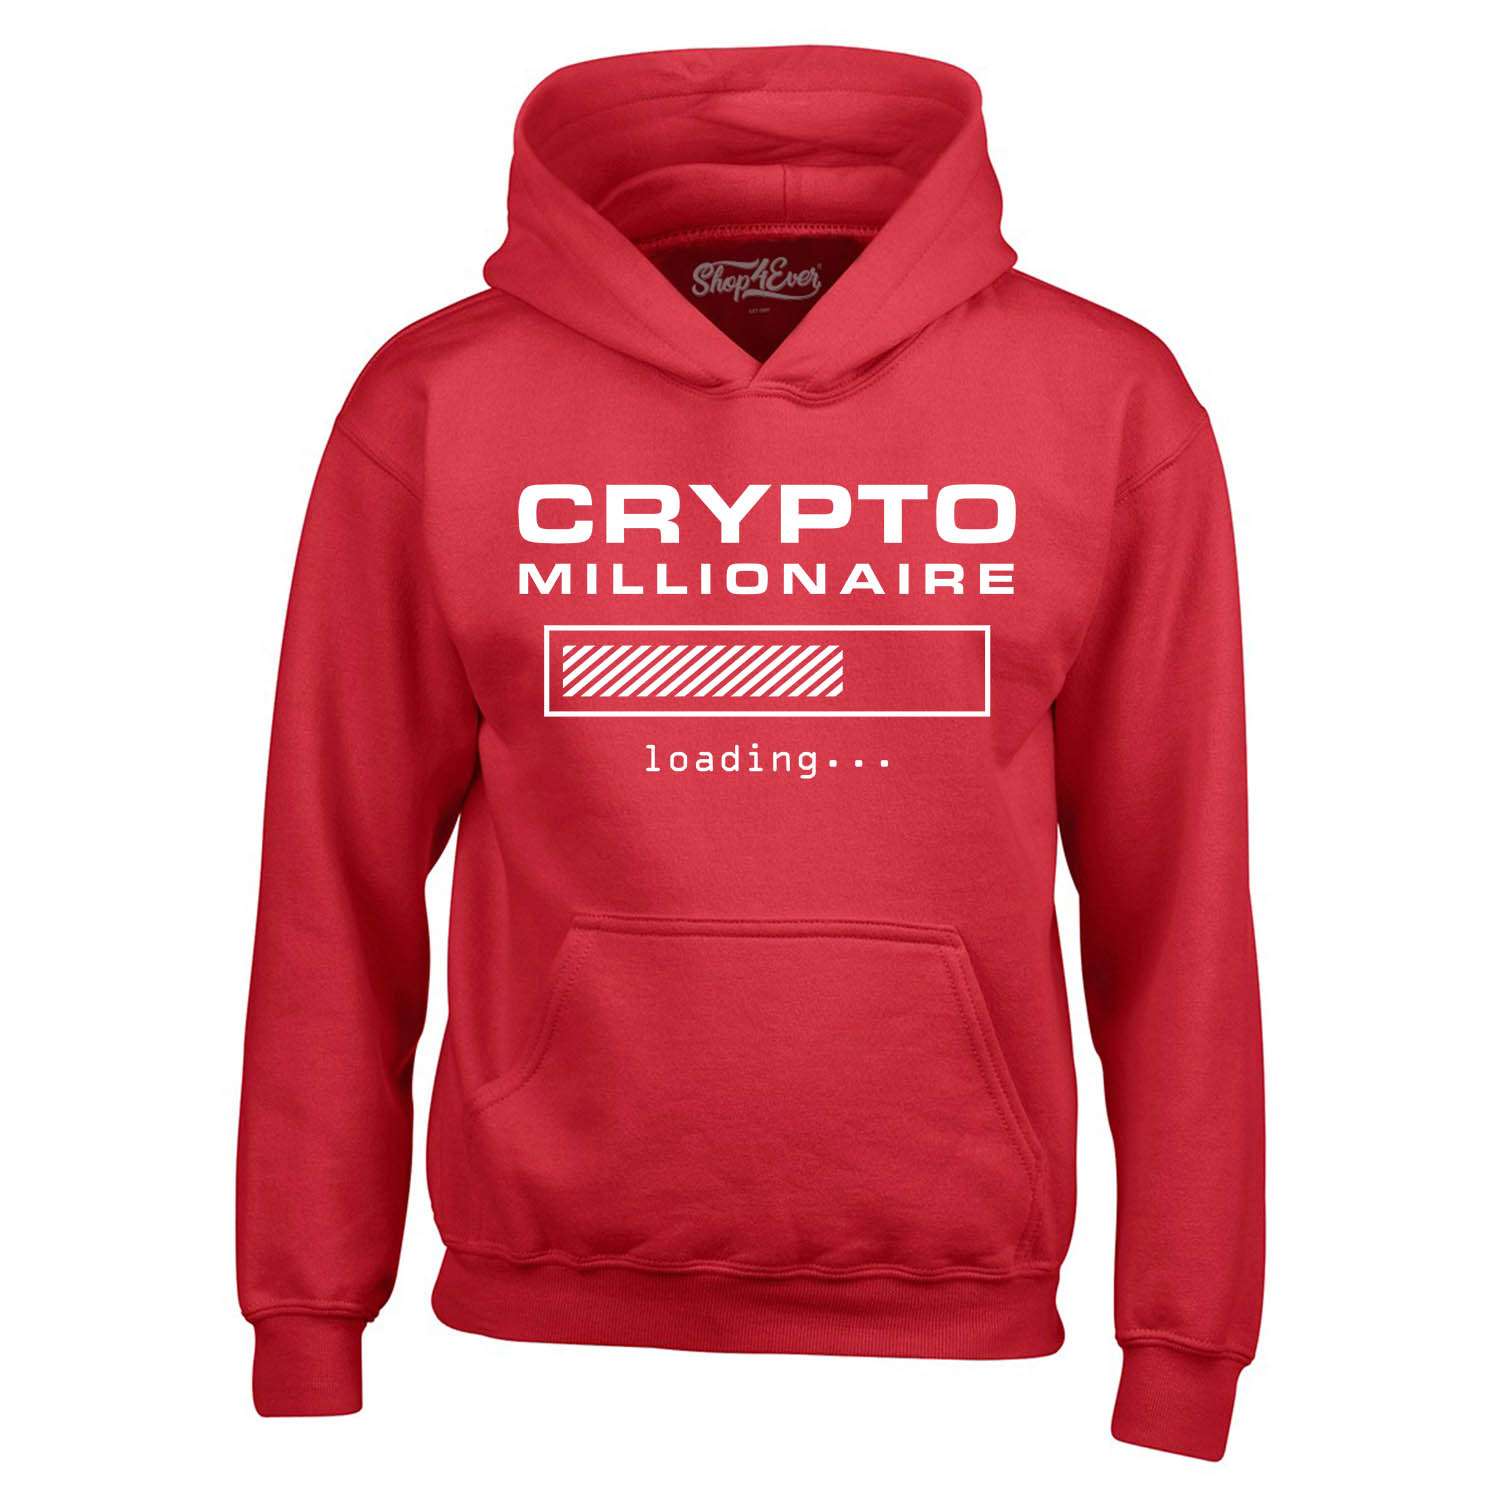 Bitcoin Cryptocurrency Sweater Pullover Hoodie S-3XL Choose Color 